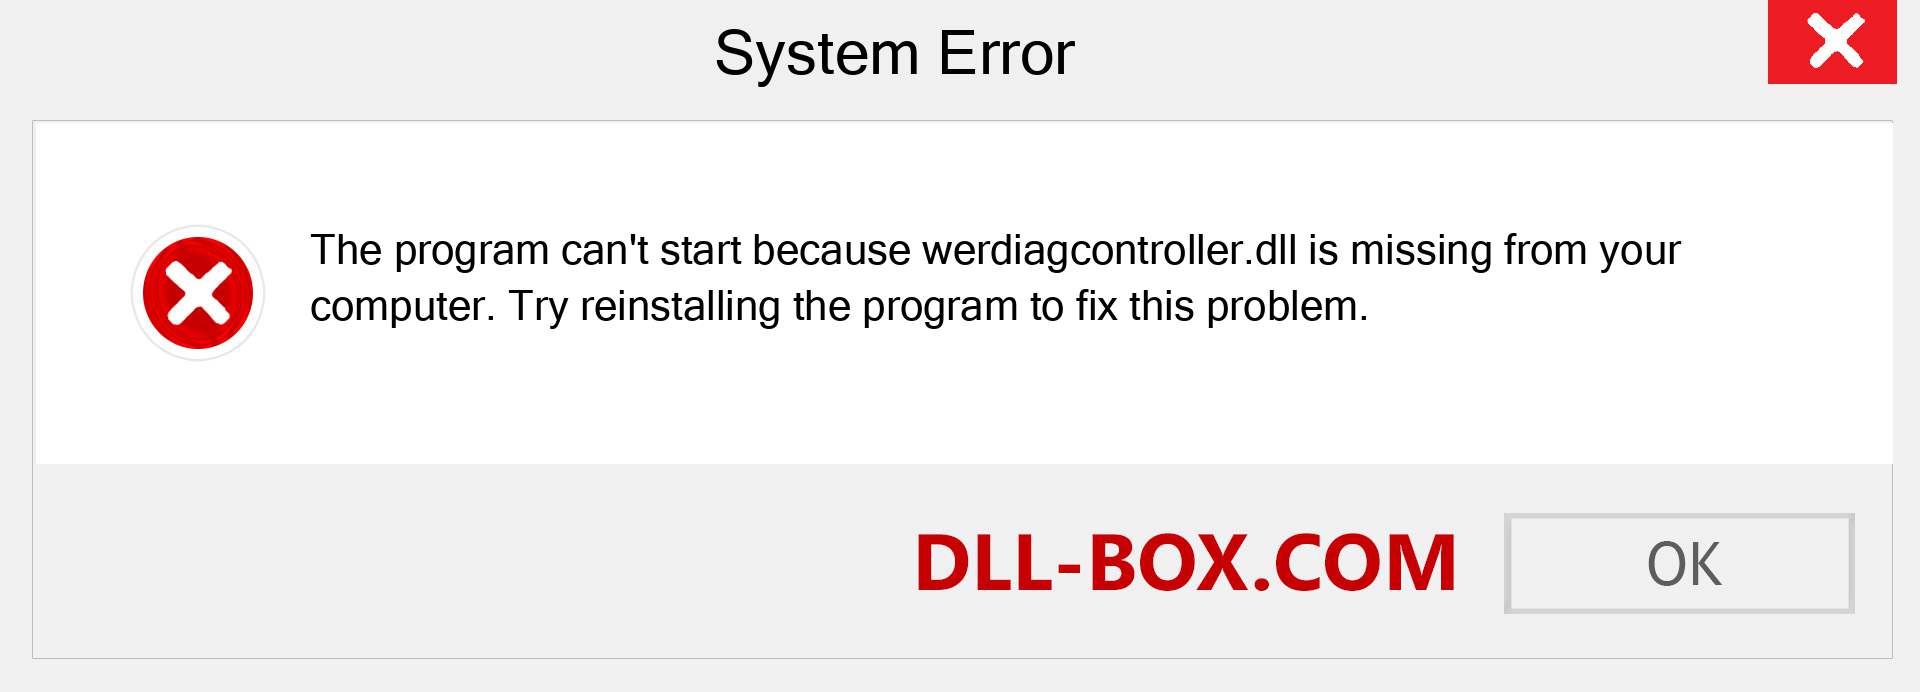  werdiagcontroller.dll file is missing?. Download for Windows 7, 8, 10 - Fix  werdiagcontroller dll Missing Error on Windows, photos, images